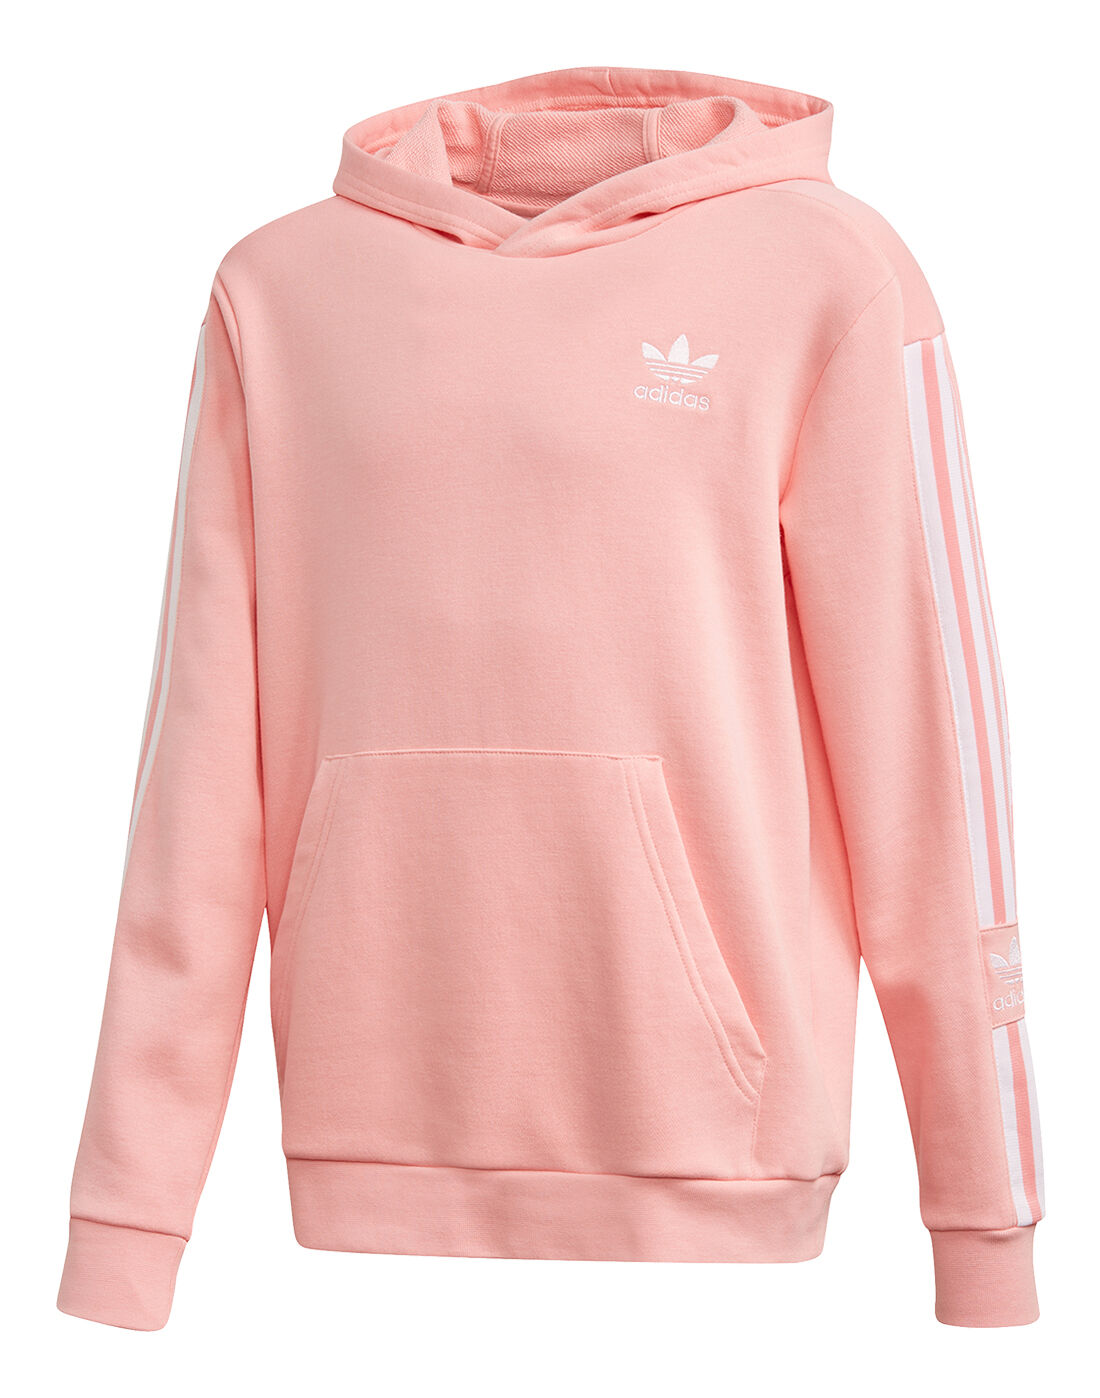 about you adidas hoodie